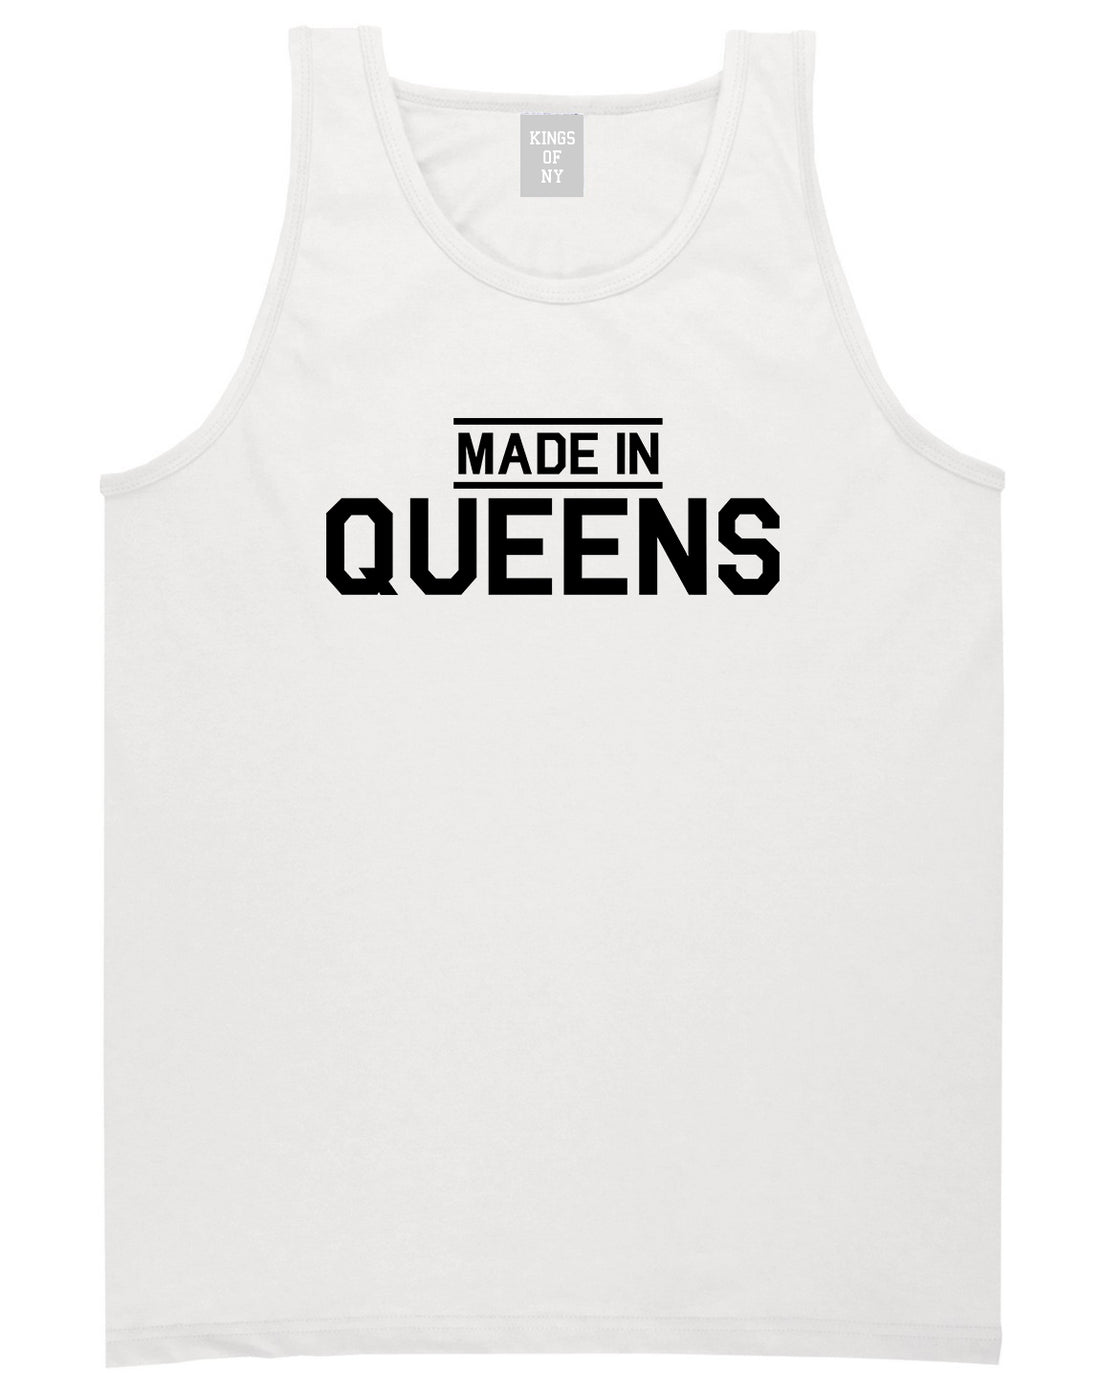 Made In Queens NY Mens Tank Top T-Shirt White